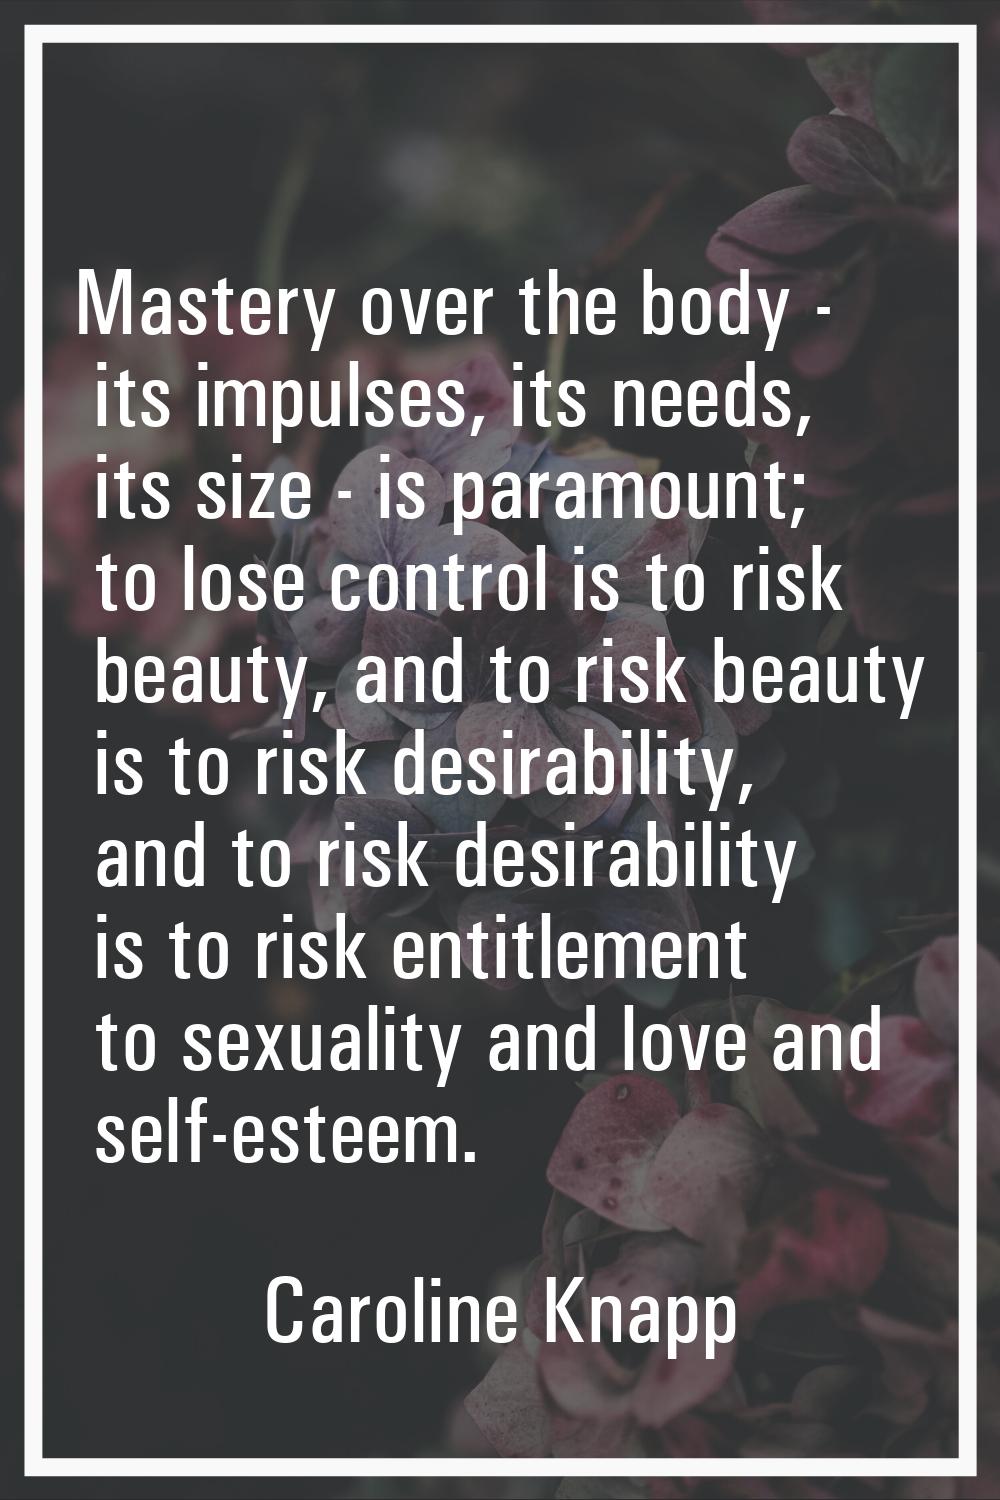 Mastery over the body - its impulses, its needs, its size - is paramount; to lose control is to ris